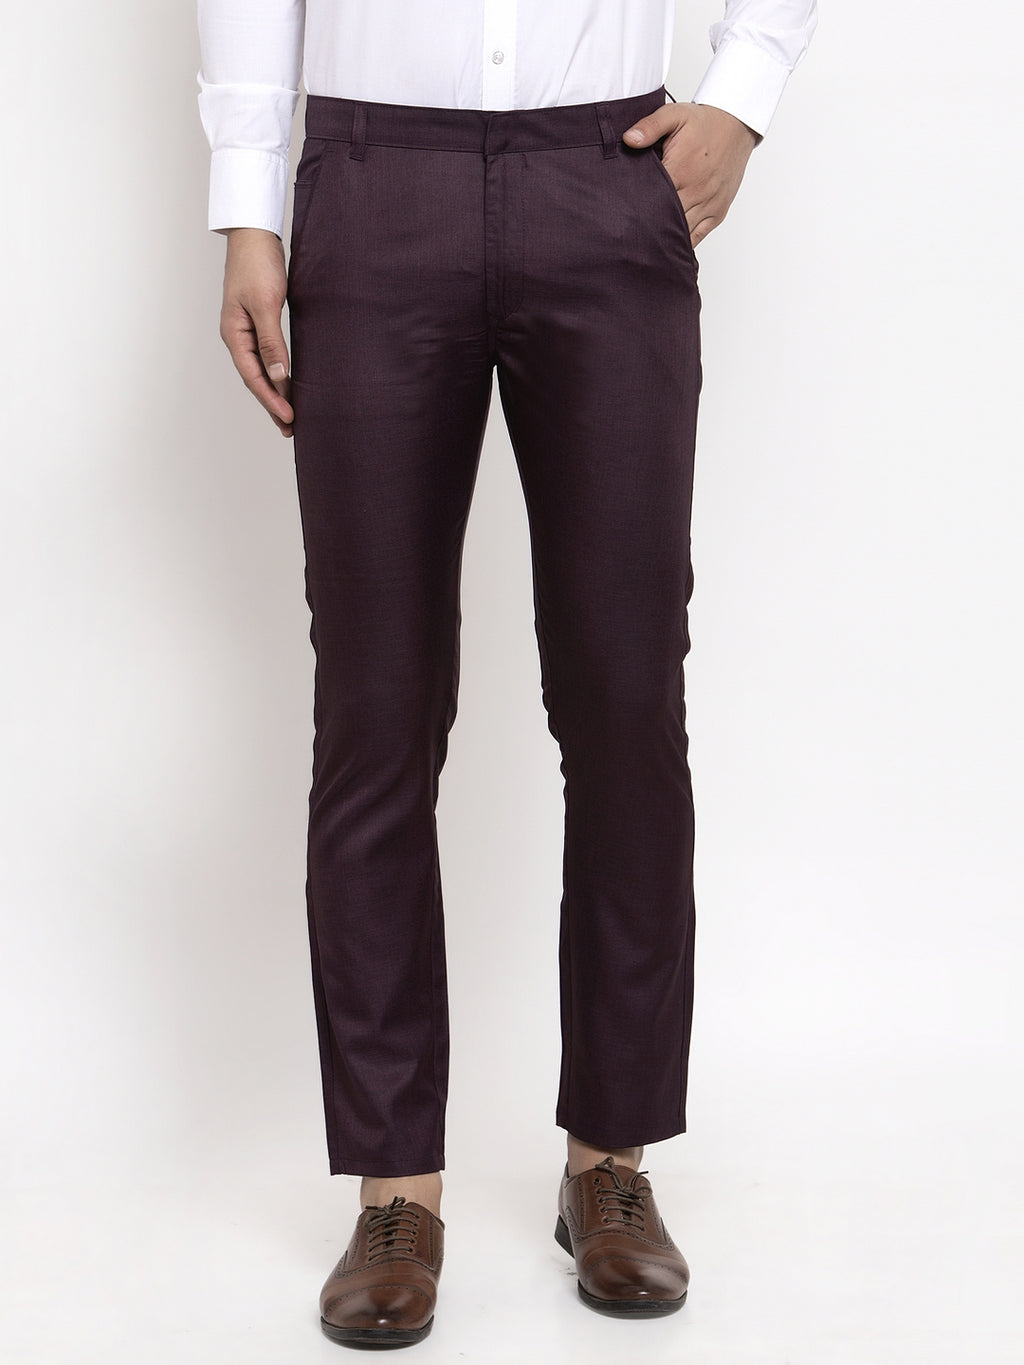 Cotton Mens Wear Formal Pant, Flat Trousers at Rs 699 in Jaipur